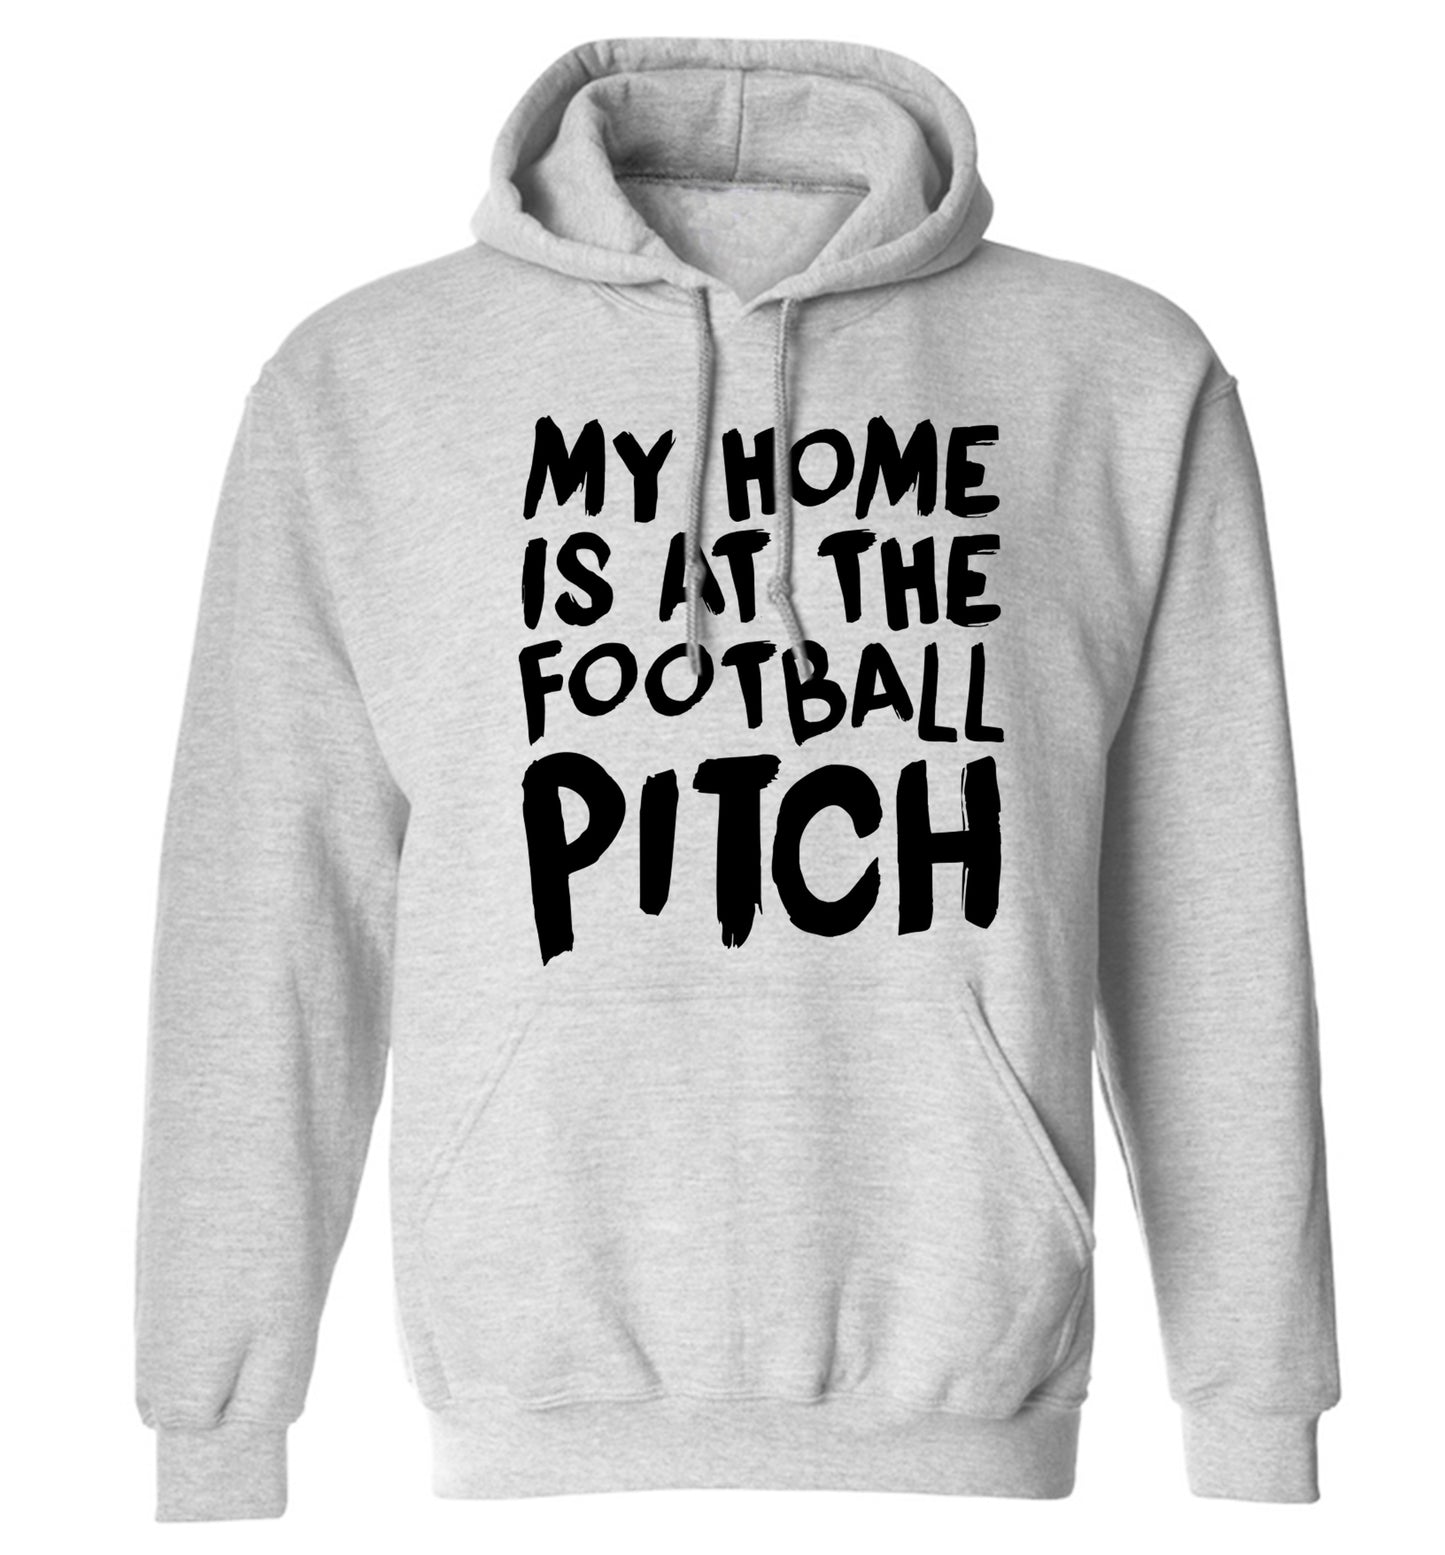 My home is at the football pitch adults unisex grey hoodie 2XL